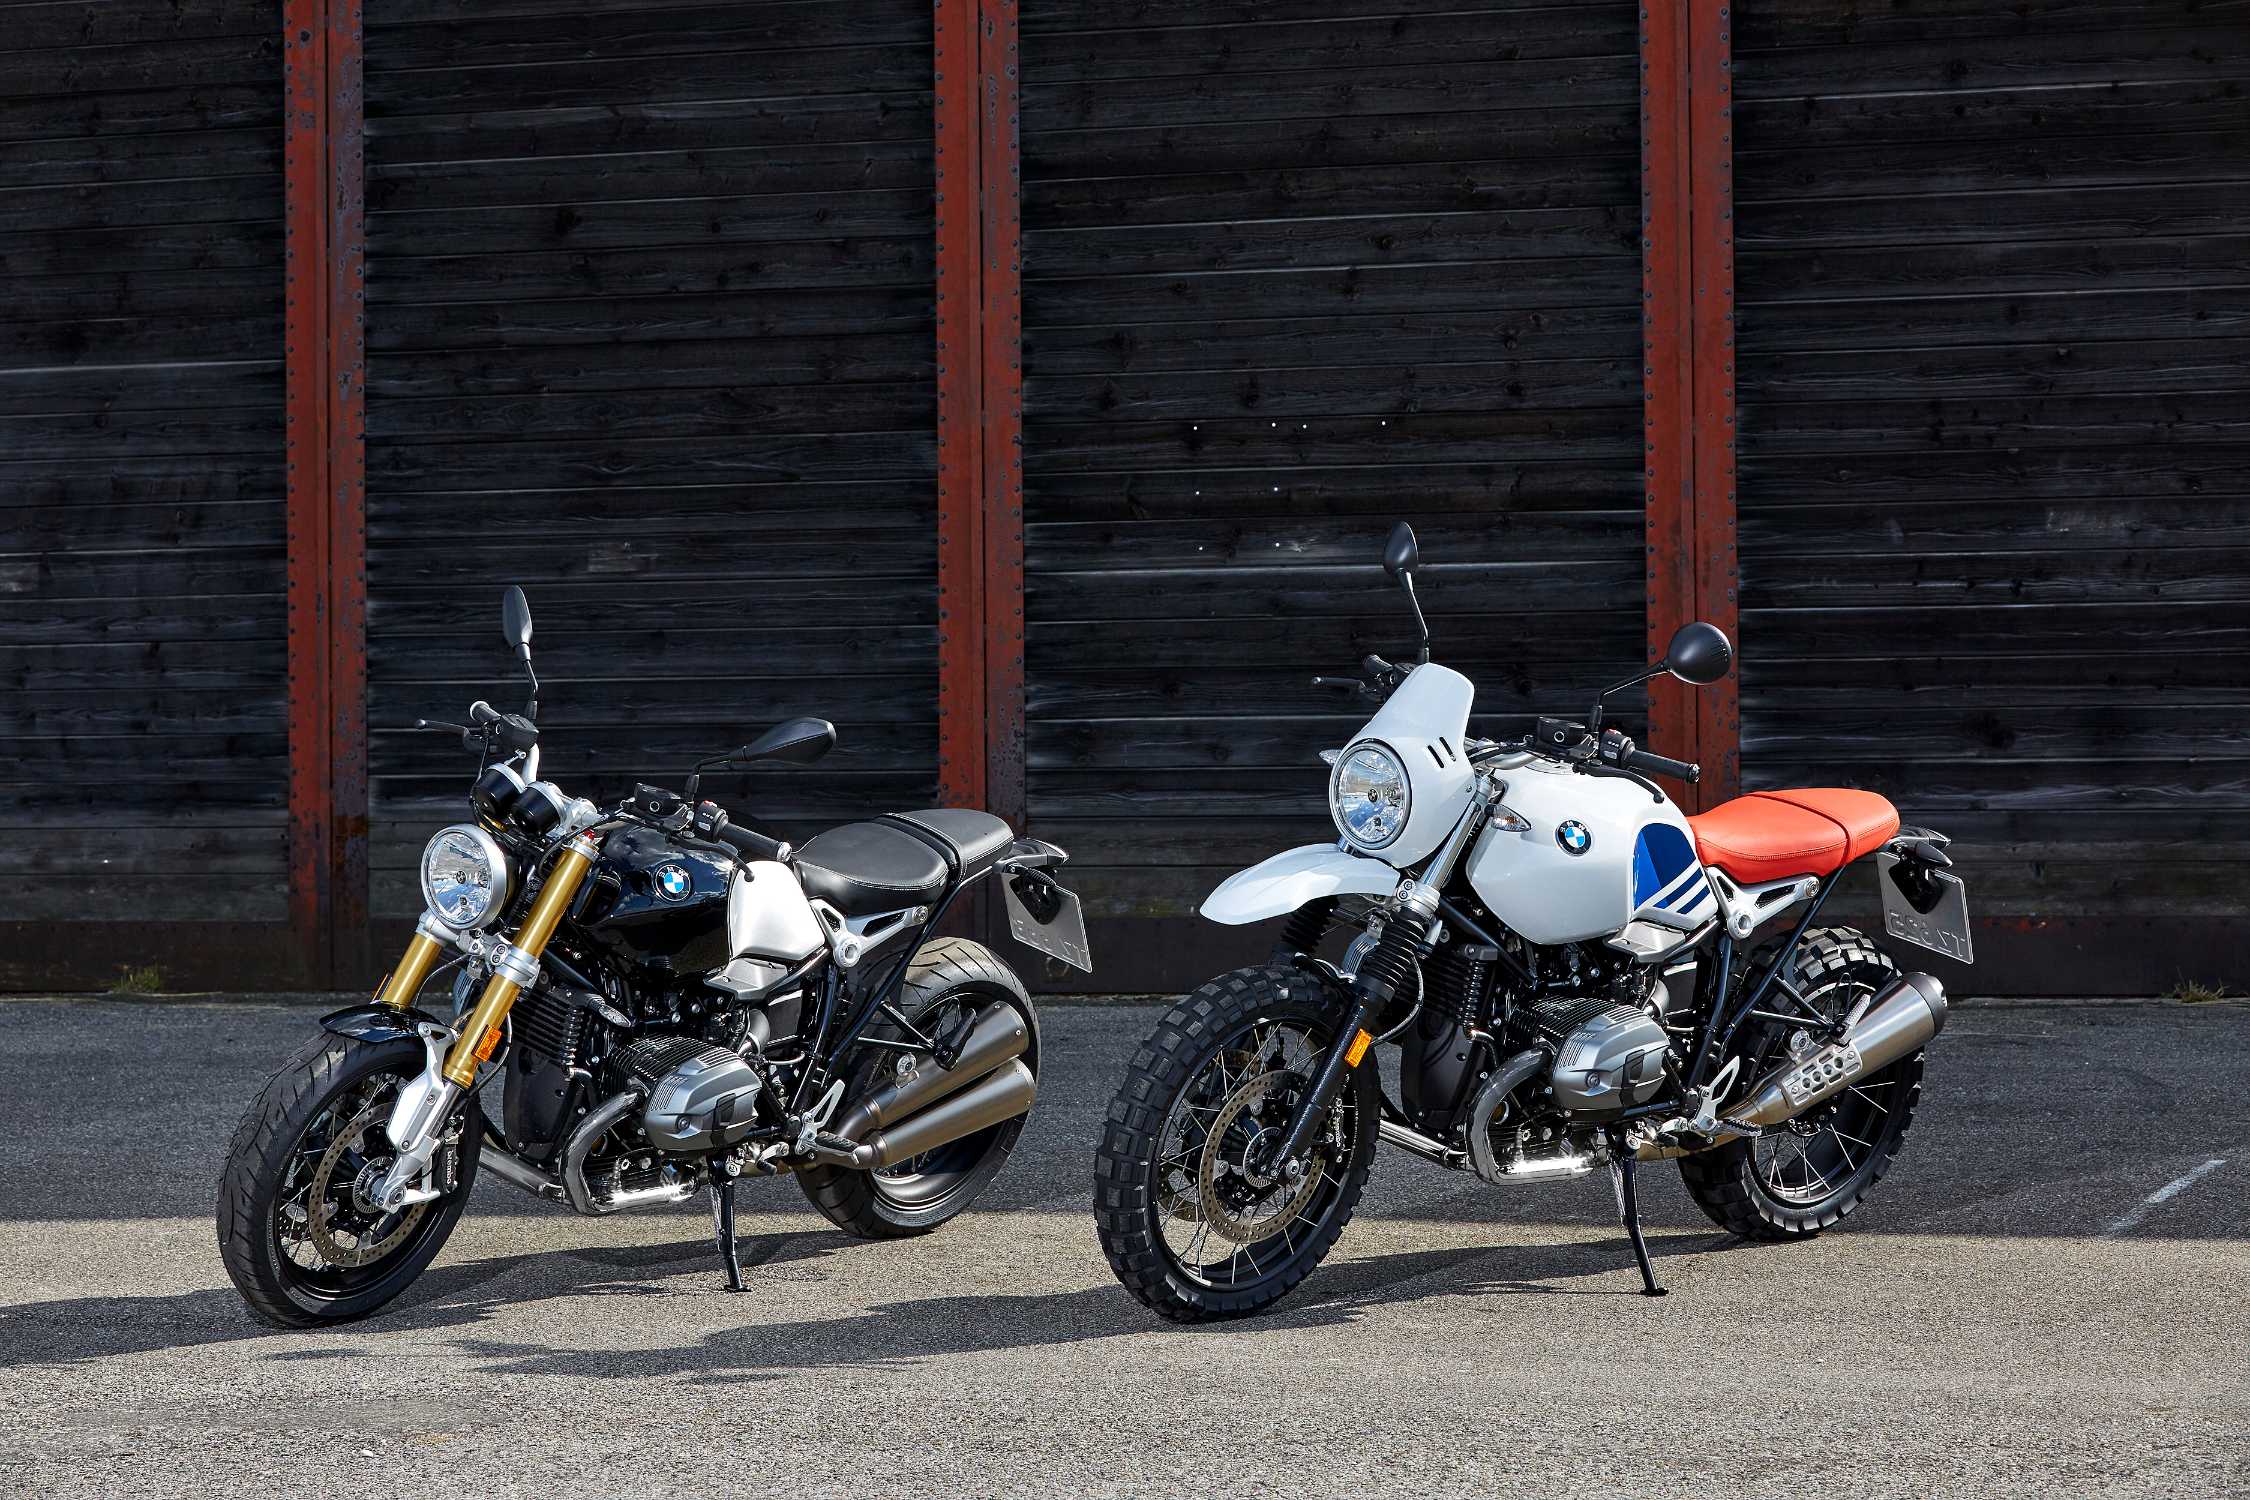 The new BMW R nineT and R nineT Urban G/S.